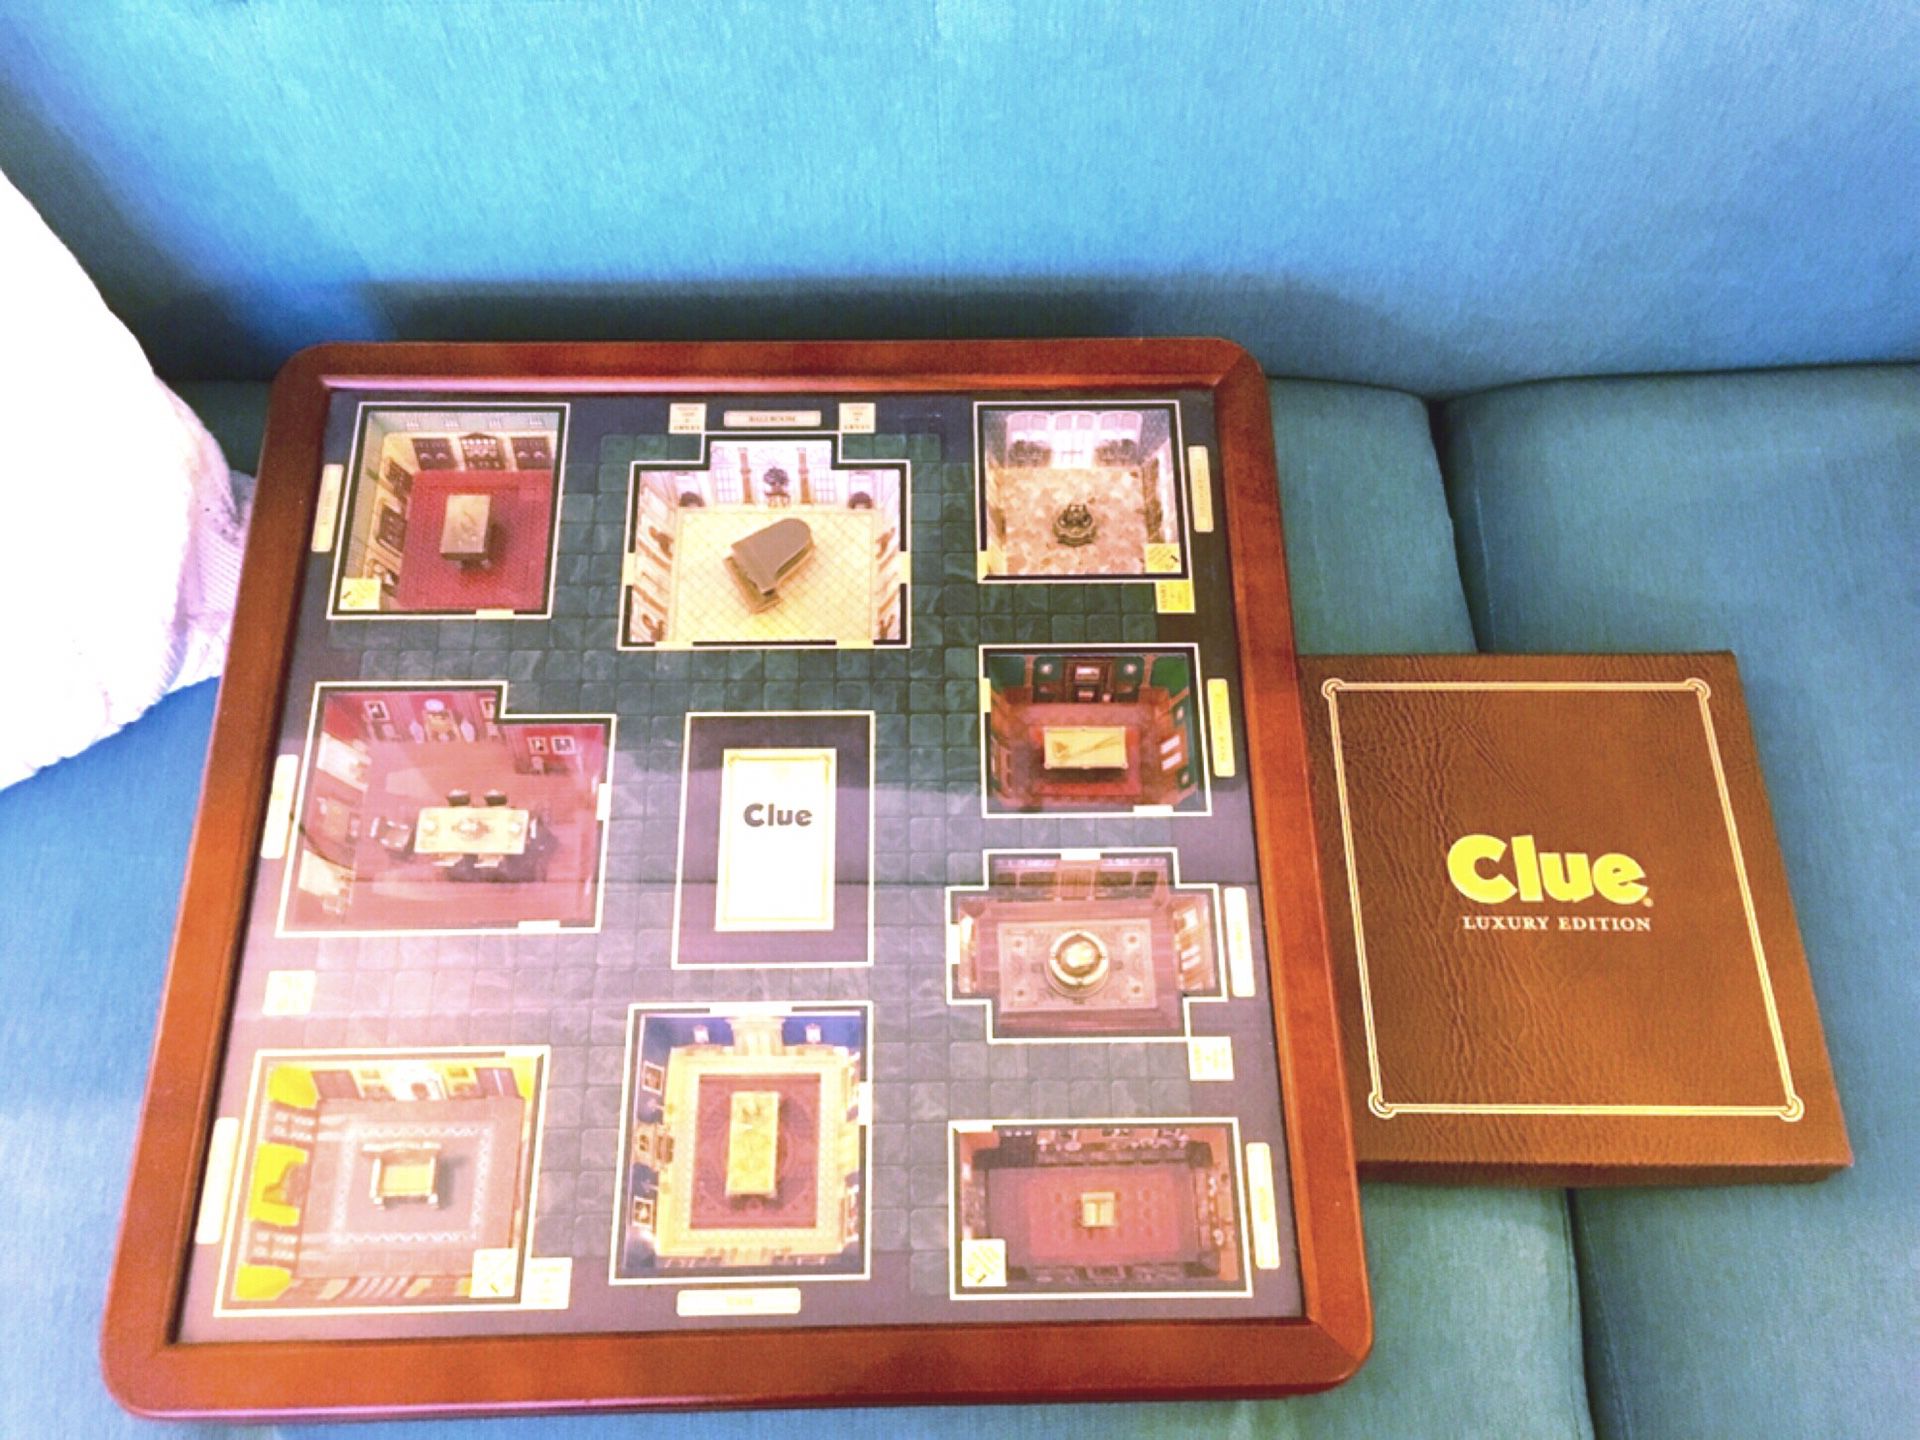 Clue luxury edition 3D room furniture board game Cluedo